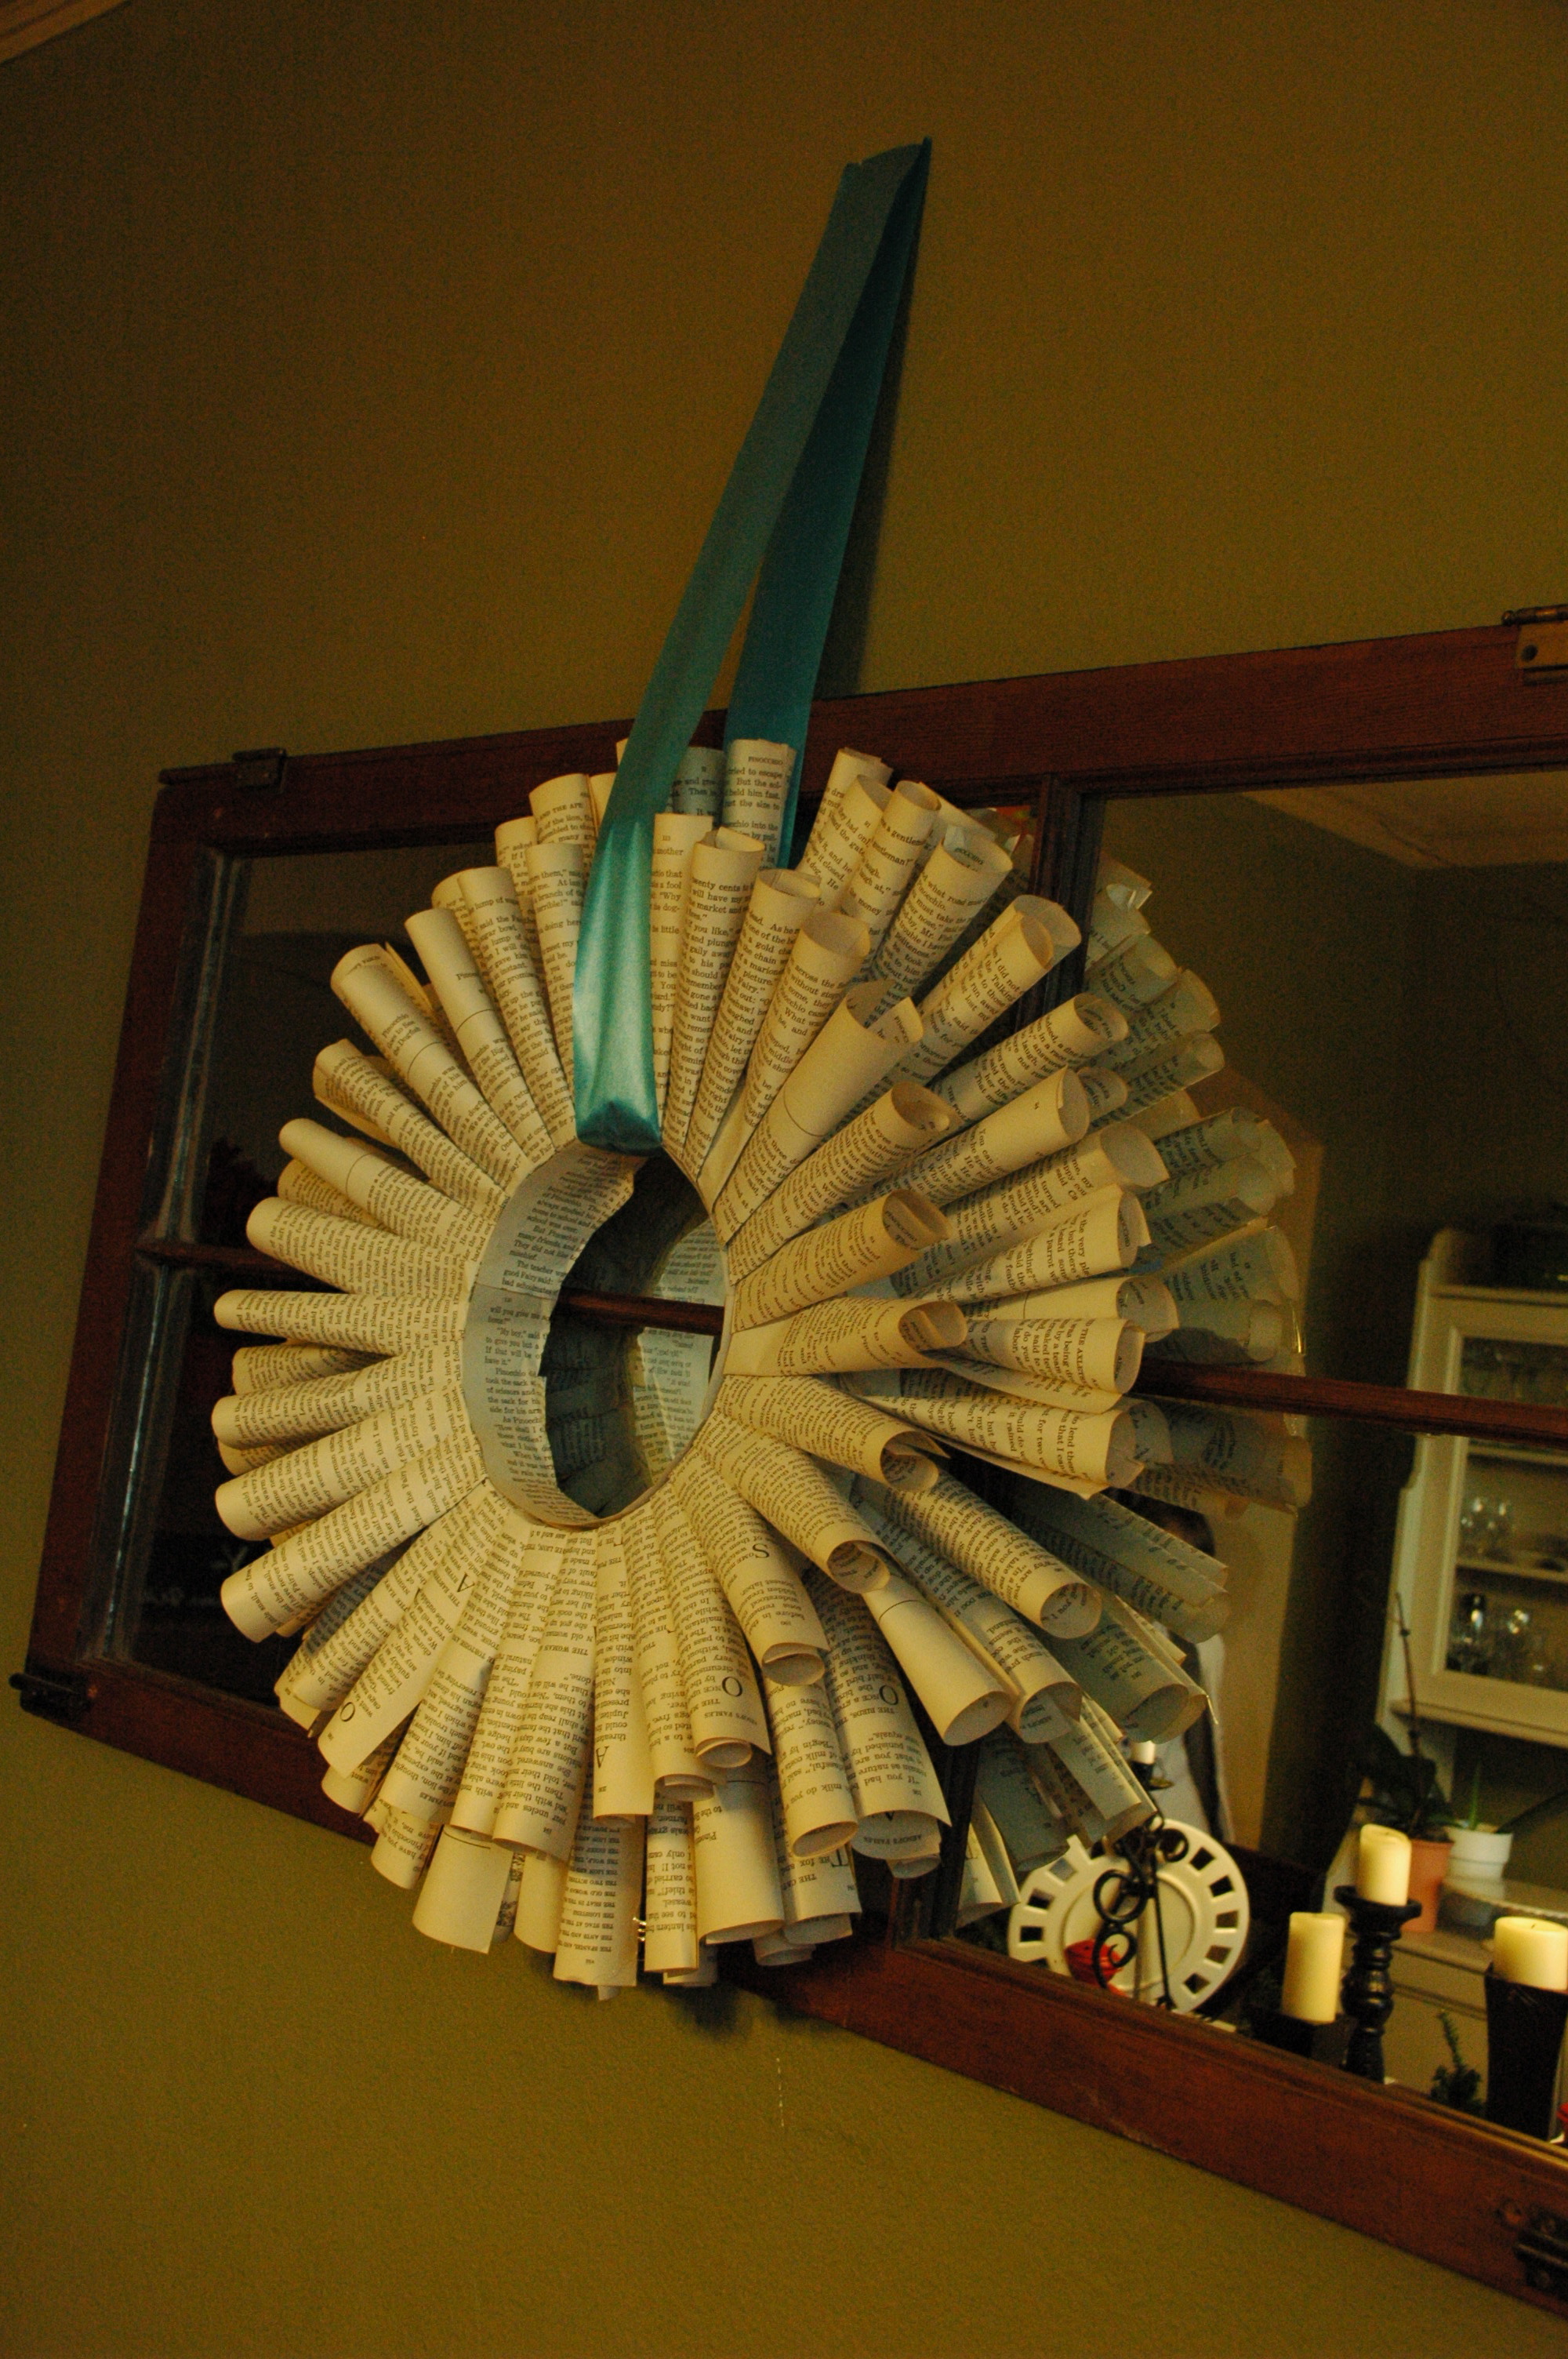 I made a book page wreath. You can too!